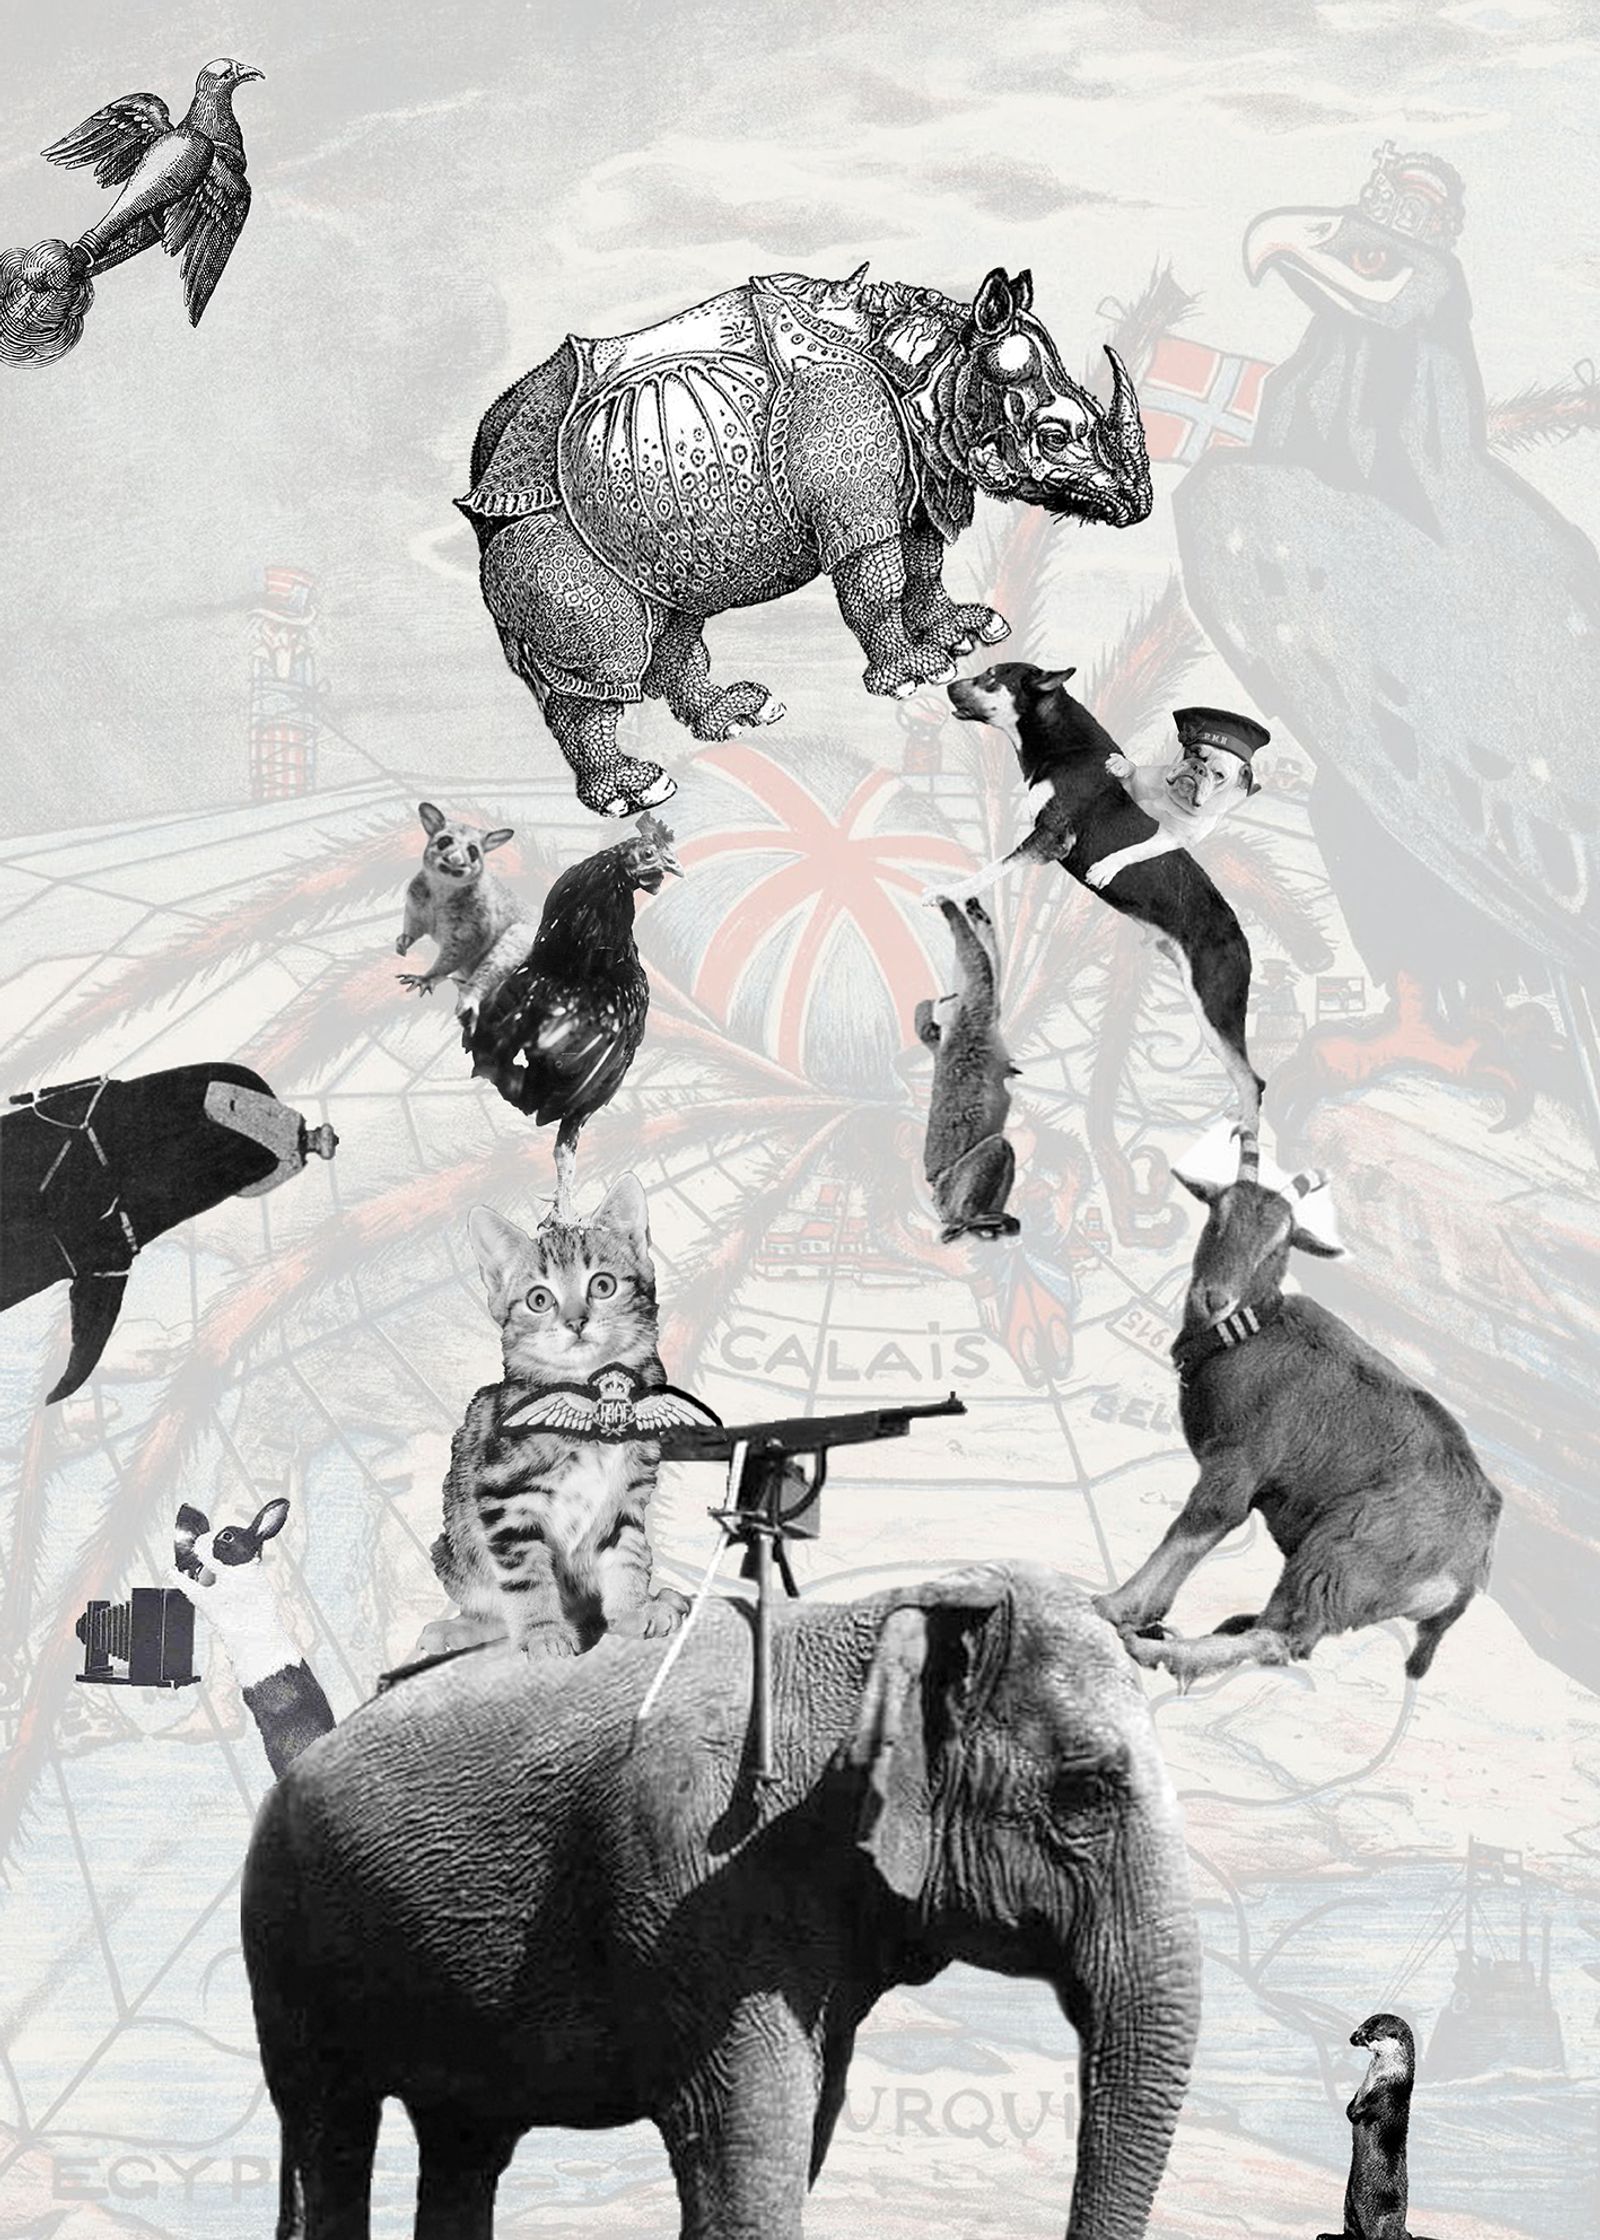 © Marta Bogdanska - Collage #1 (after The Pyramid of Animals by Katarzyna Kozyra), from the project SHIFTERS, 2021